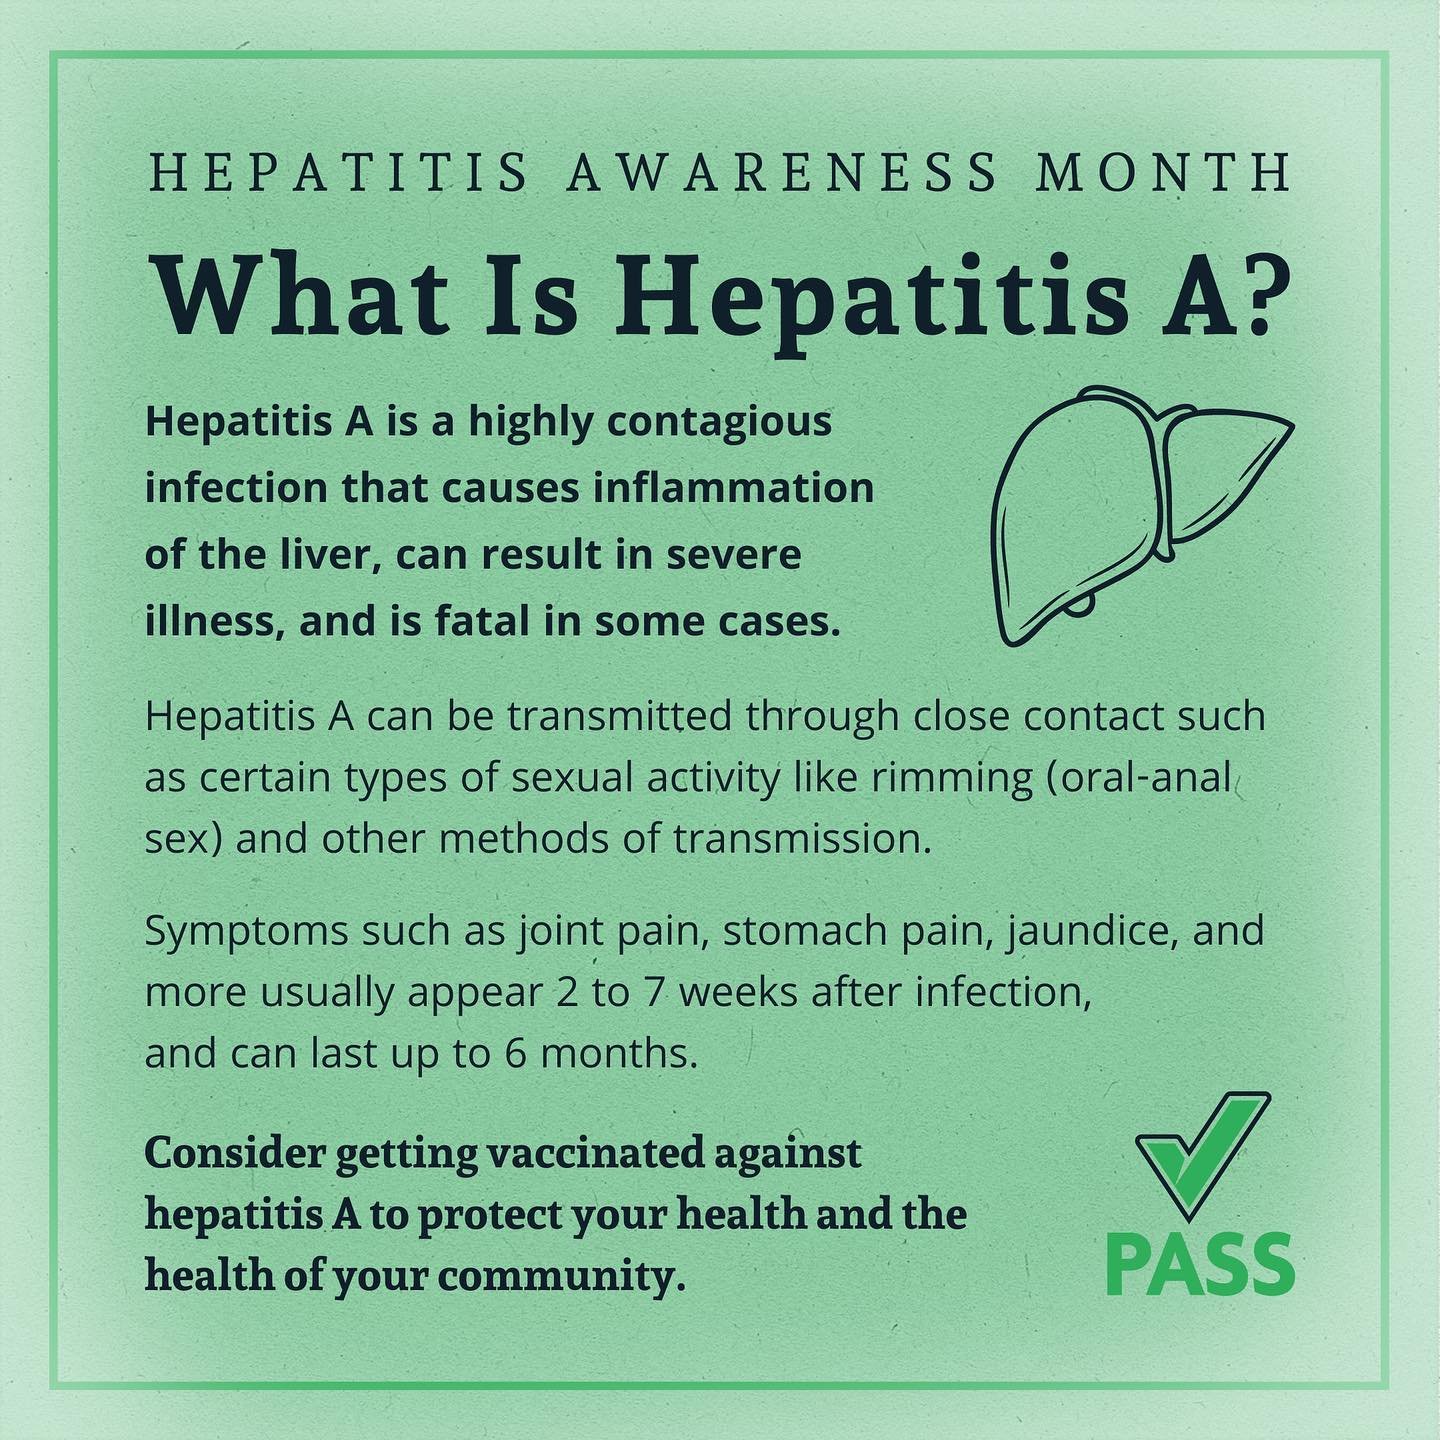 May is #HepatitisAwarenessMonth. PASS encourages all adult industry workers to stay informed on issues that impact the health and safety of our community. 

To learn more about hepatitis A and the hepatitis A vaccine, visit https://www.passcertified.